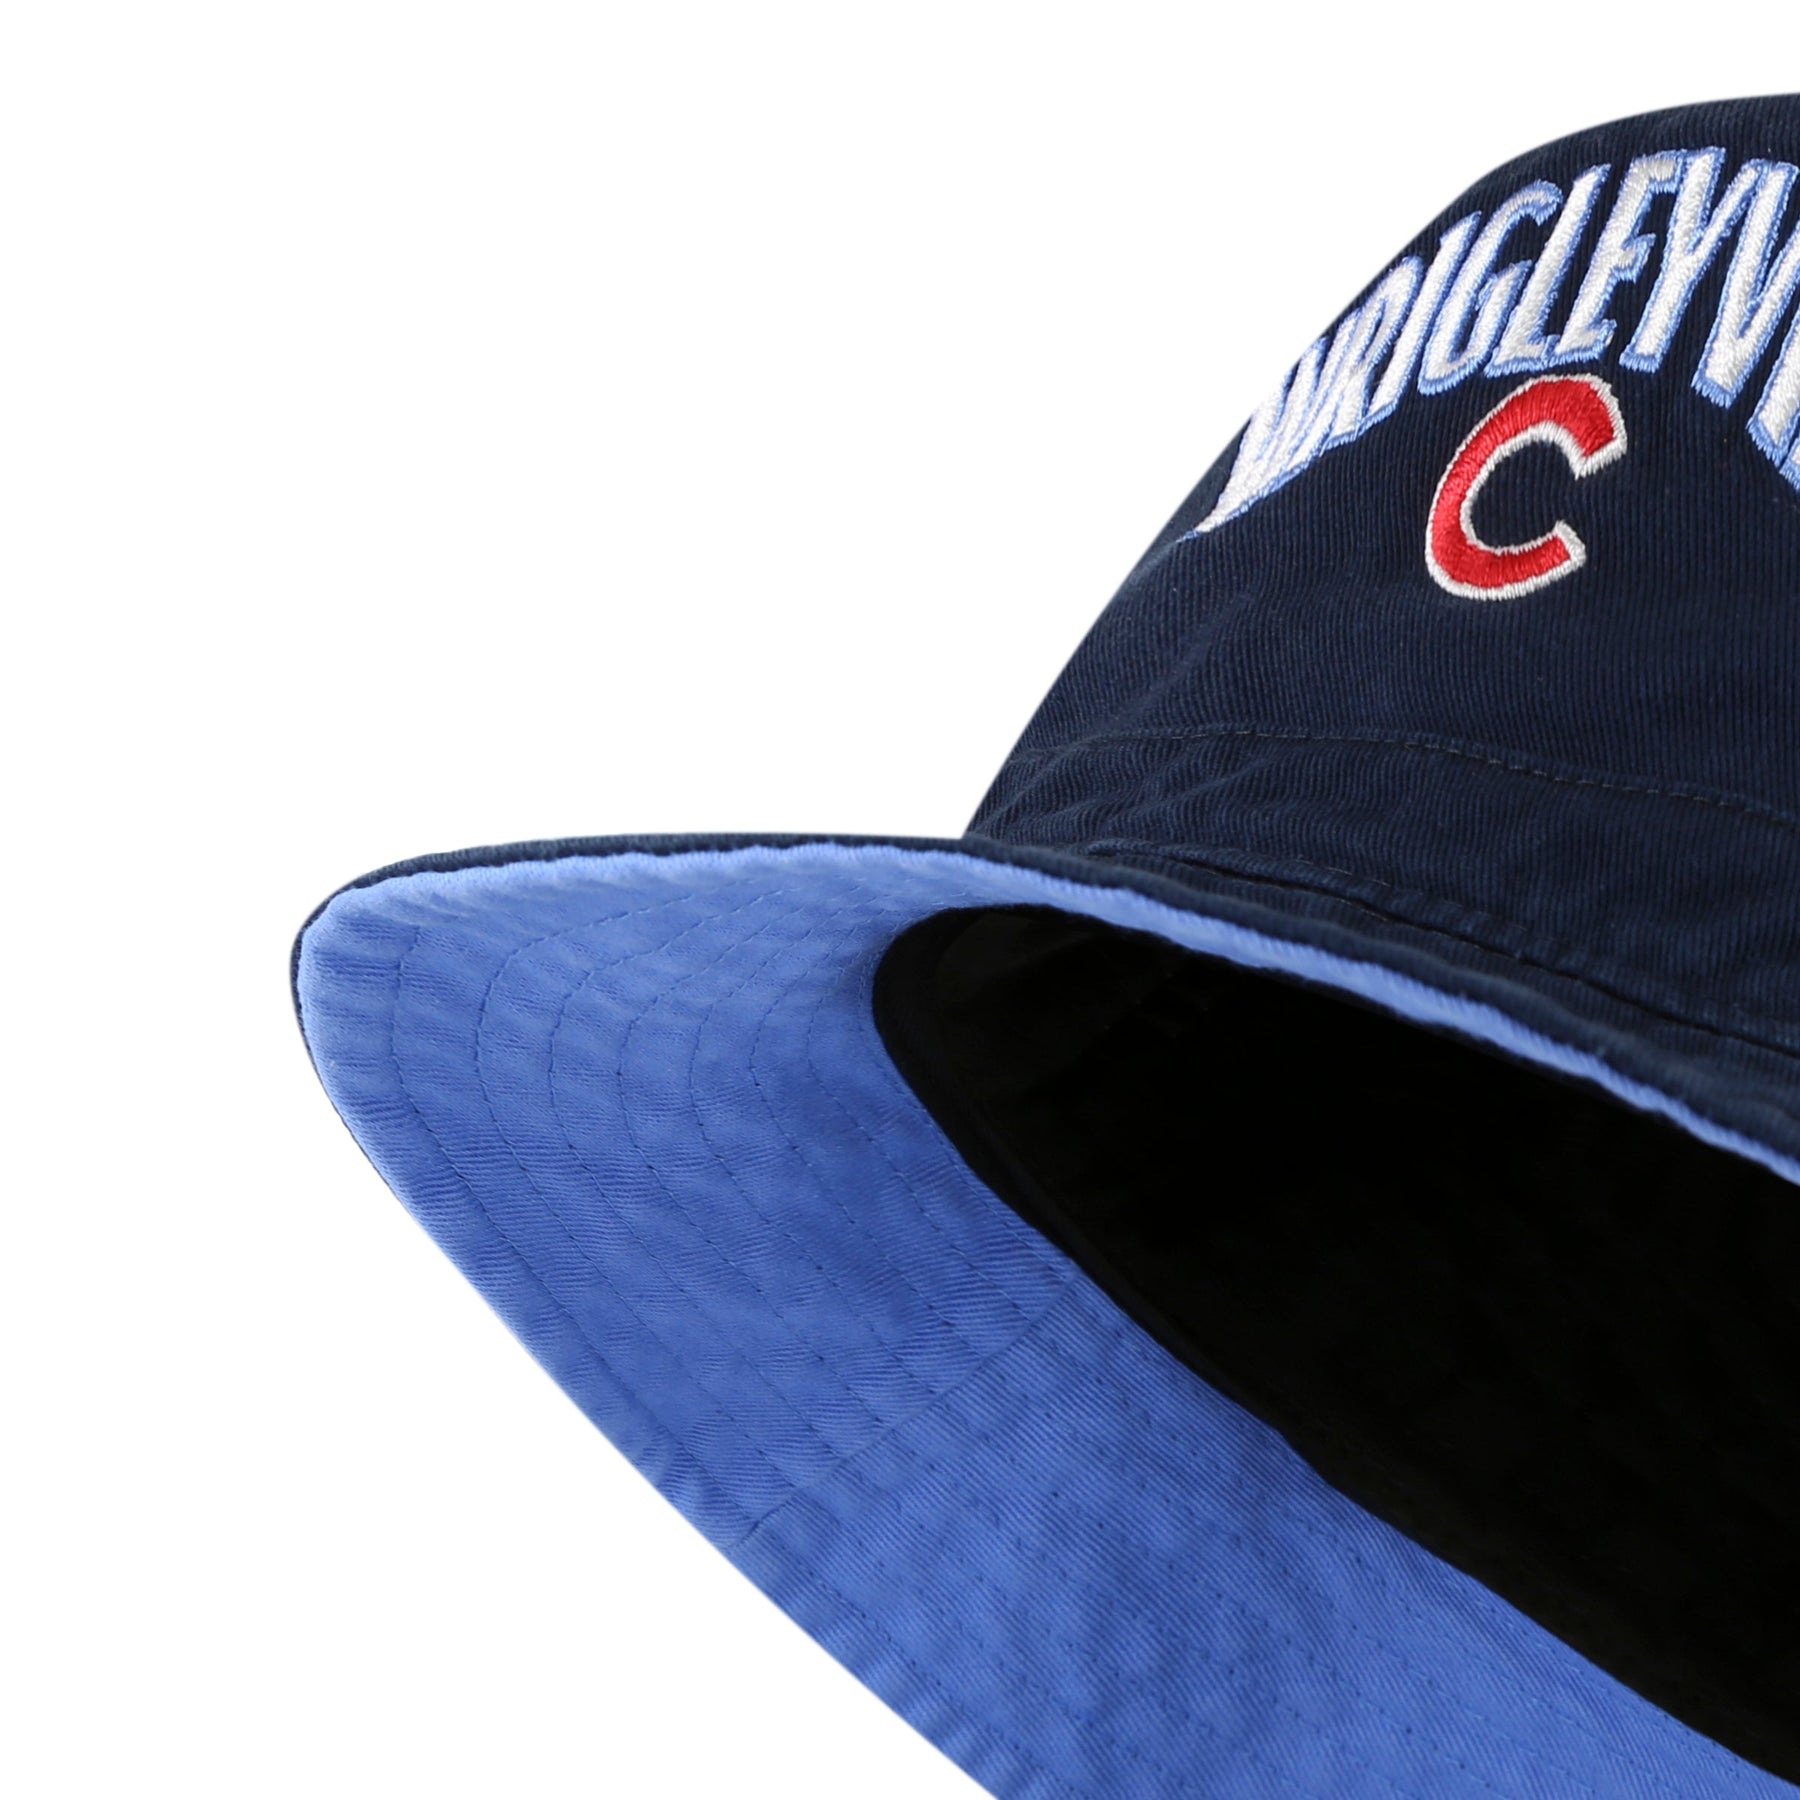 CHICAGO CUBS '47 HITCH CITY CONNECT WRIGLEYVILLE WHITE SNAPBACK ROPE C –  Ivy Shop